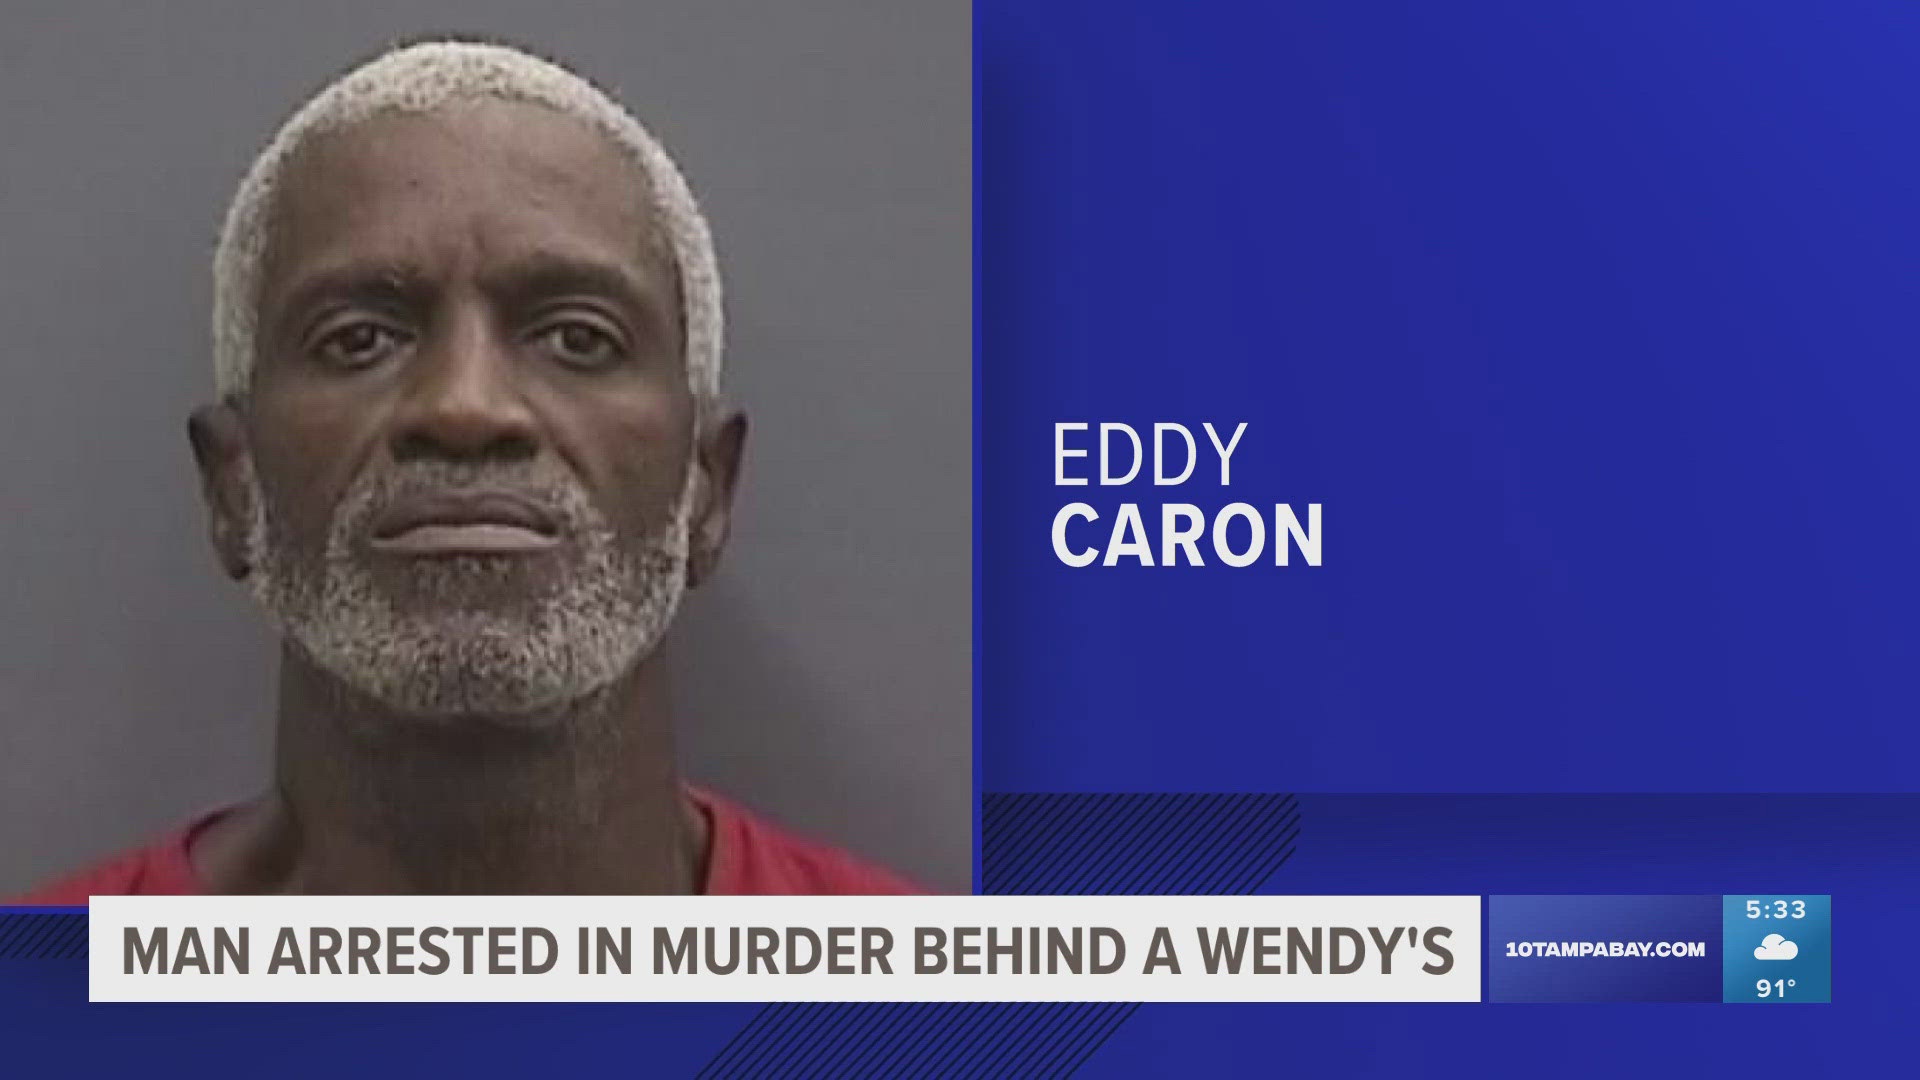 Eddy Caron is being accused of stabbing a man behind a Wendy's in Hillsborough. Caron is charged with first-degree murder.